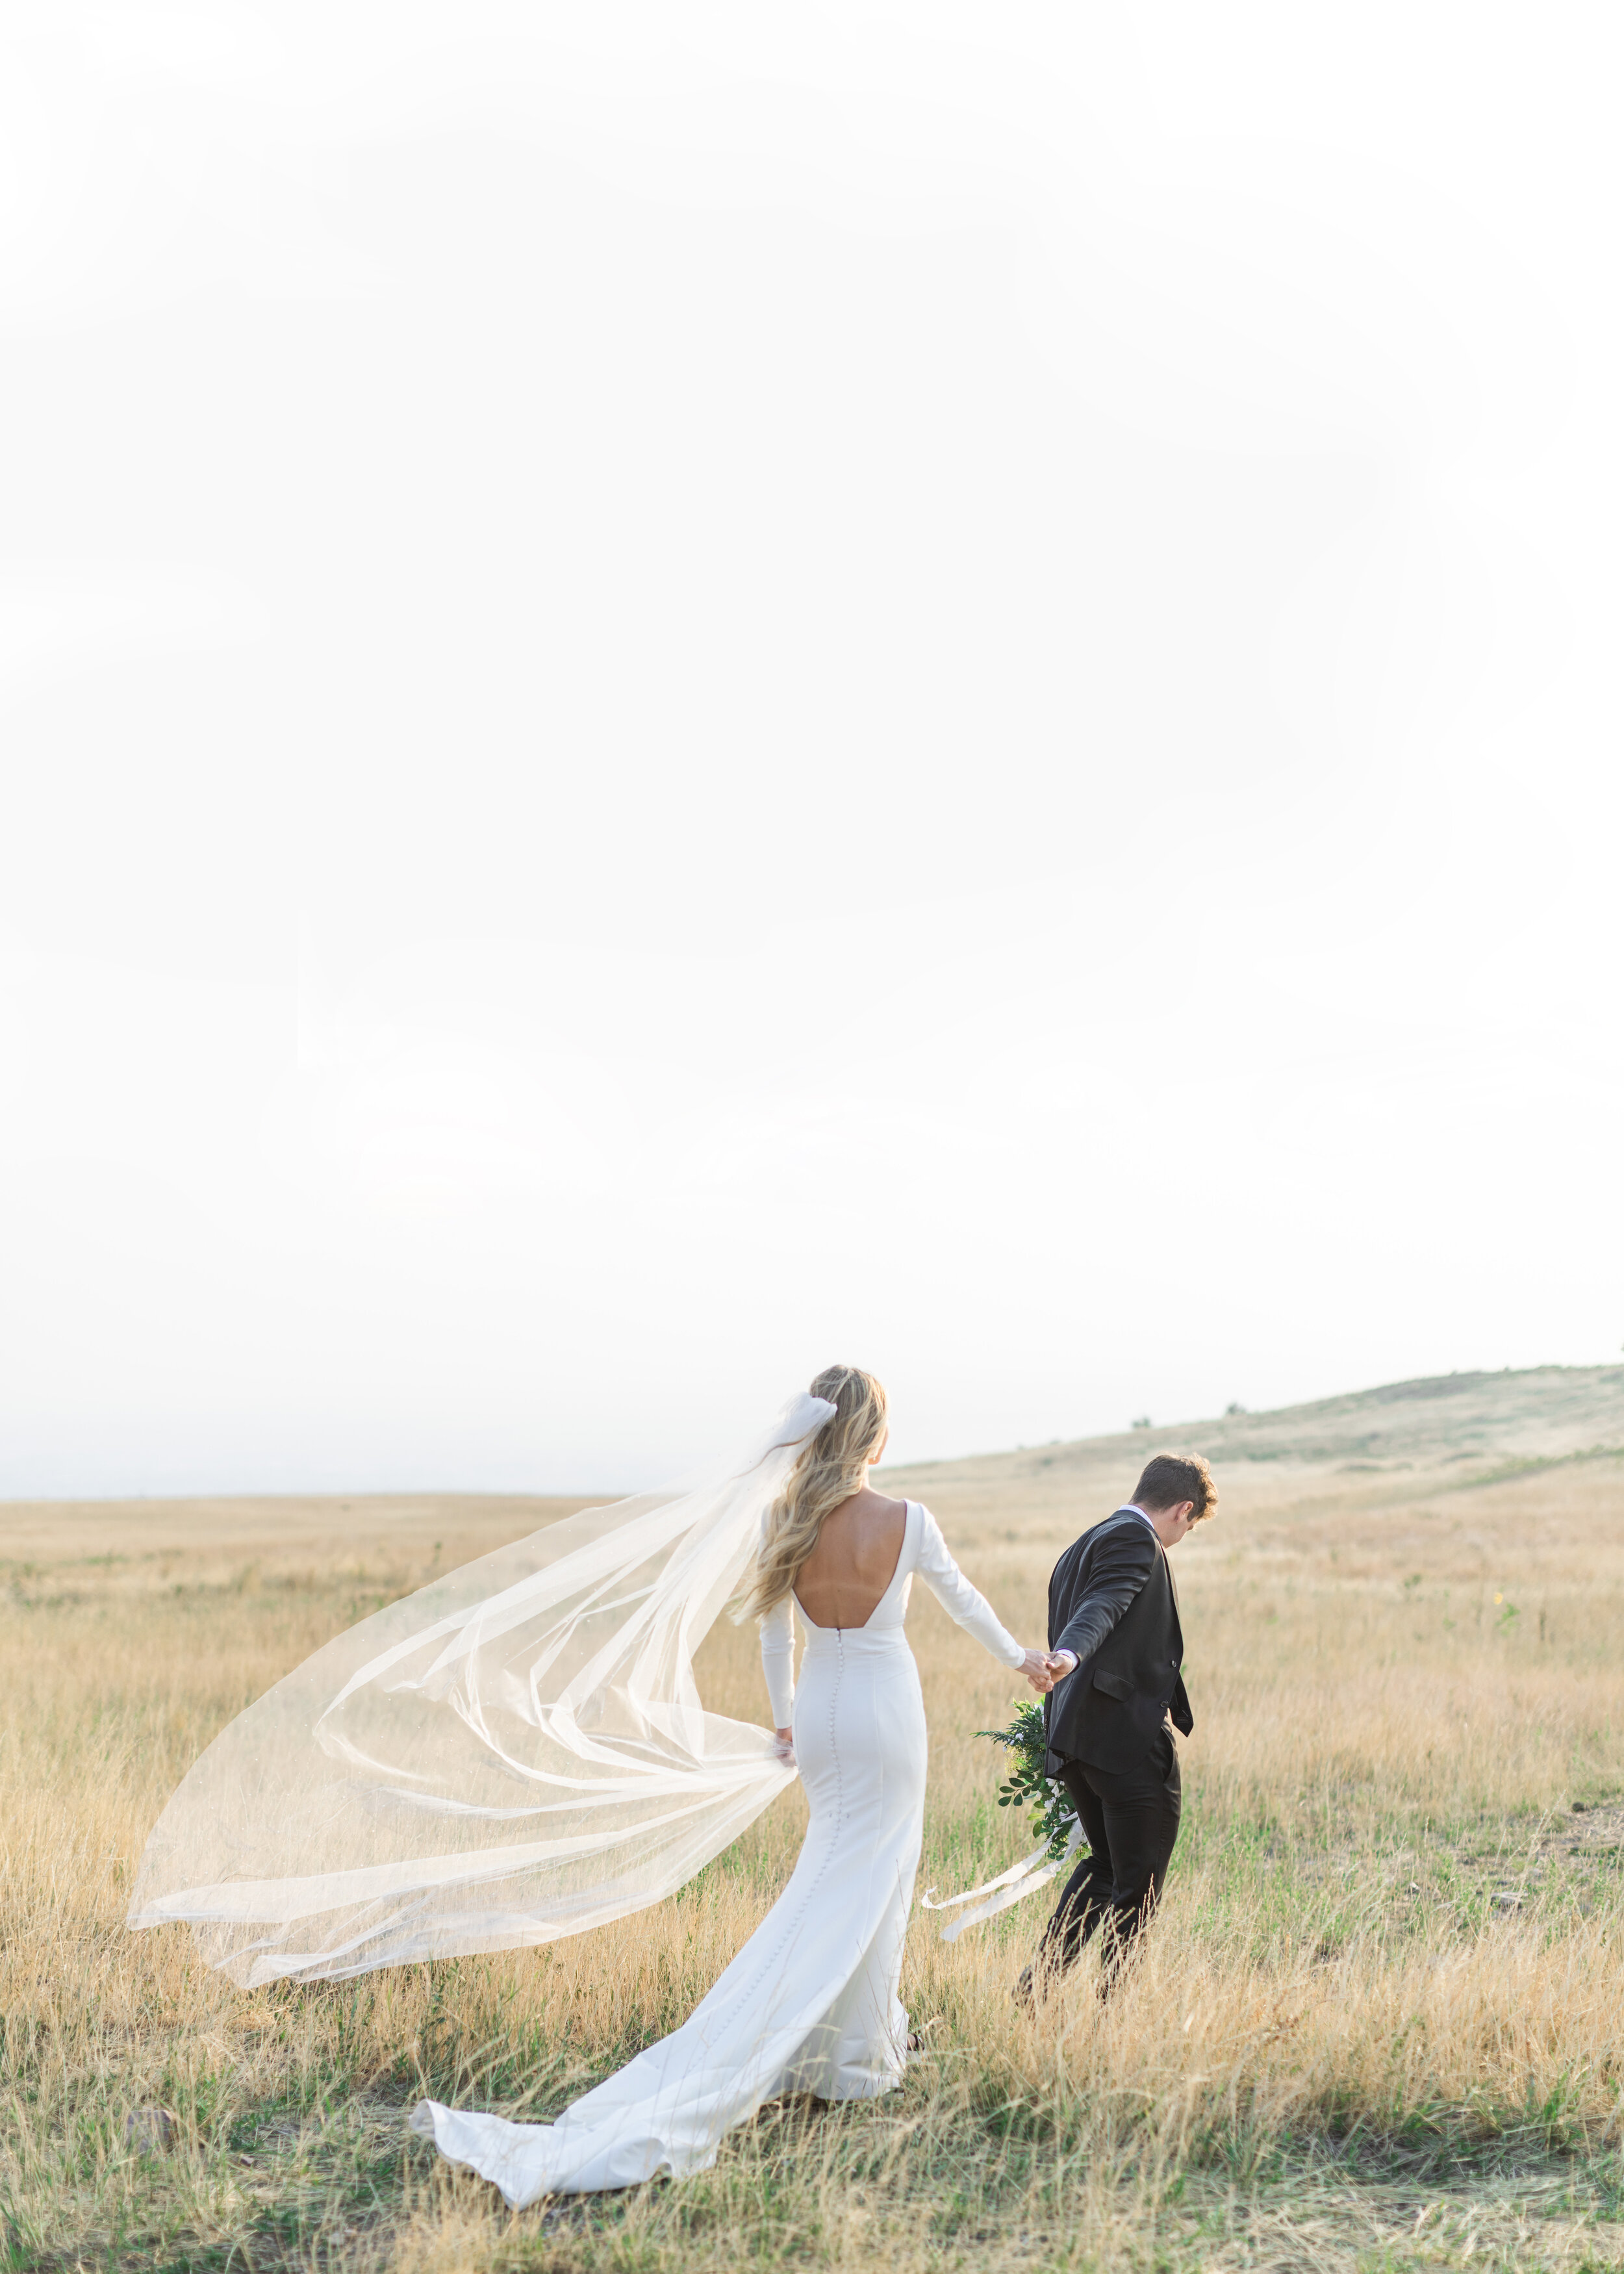  Savanna Richardson Photography captures a groom leading his bride by holding her hand in some golden rolling hills in Salt Lake City. long sleeve wedding gown big back dip wedding dress wedding veil blowing in wind #savannarichardsonphotography #sav